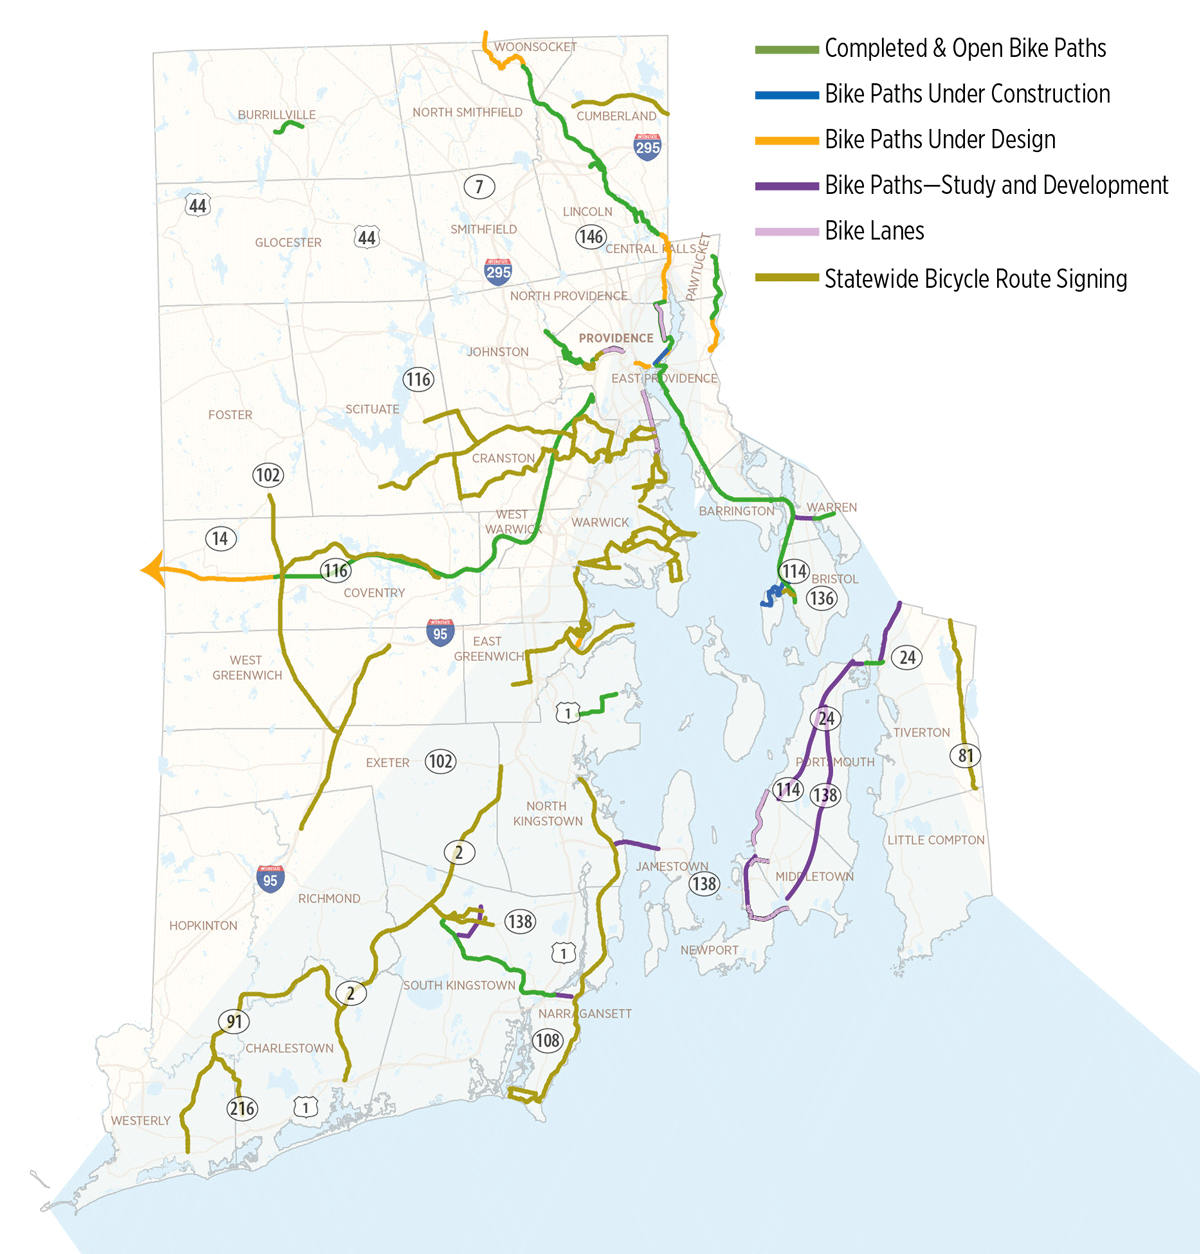 Map of Rhode Island showing indication location of bike paths in various states of development or completion.